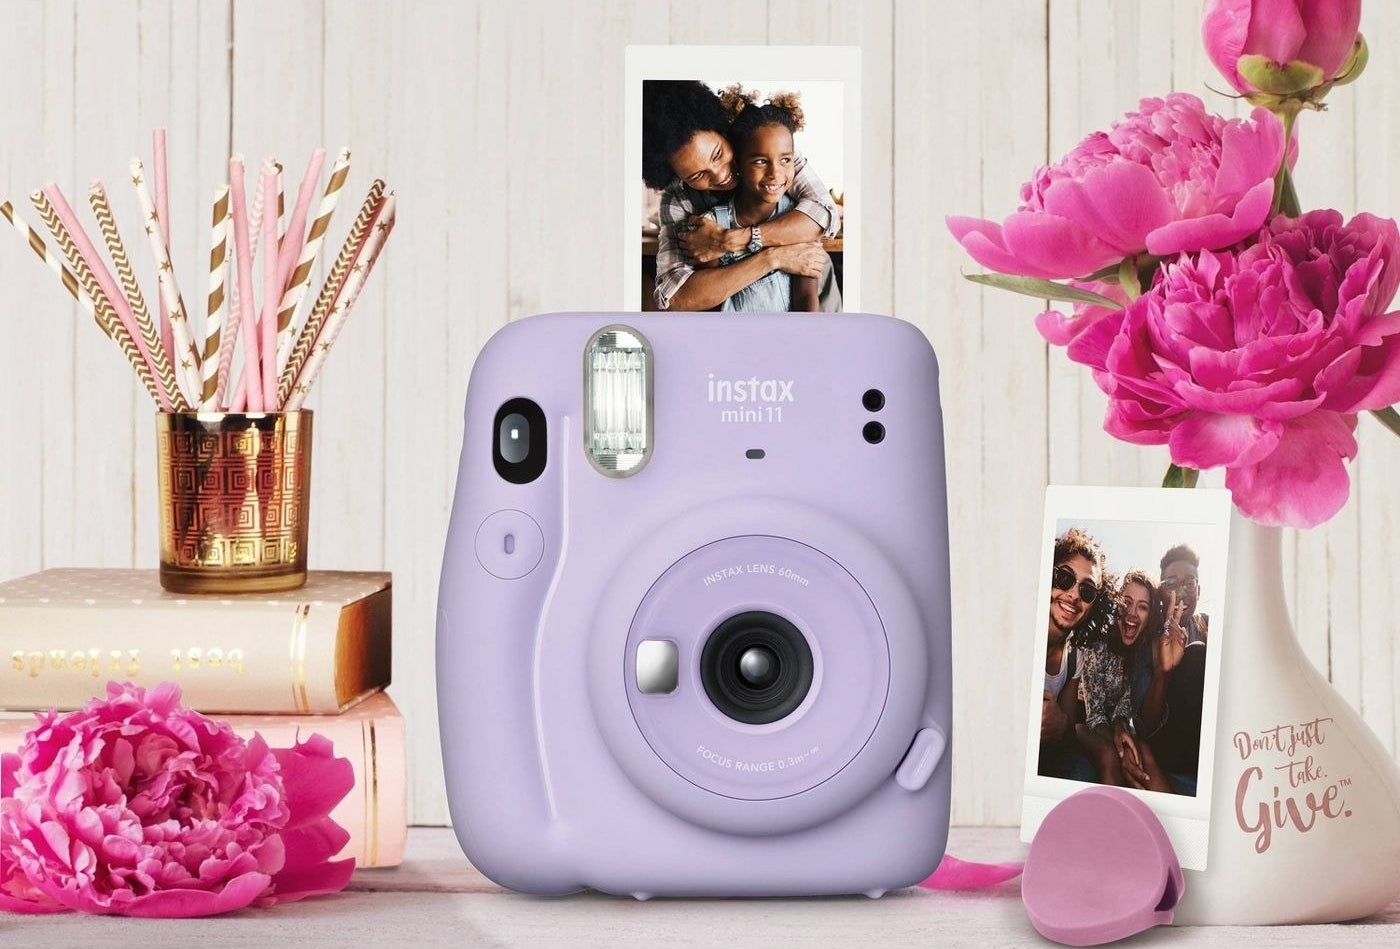 The Fuji Instax Mini in purple surrounded by pictures it has taken